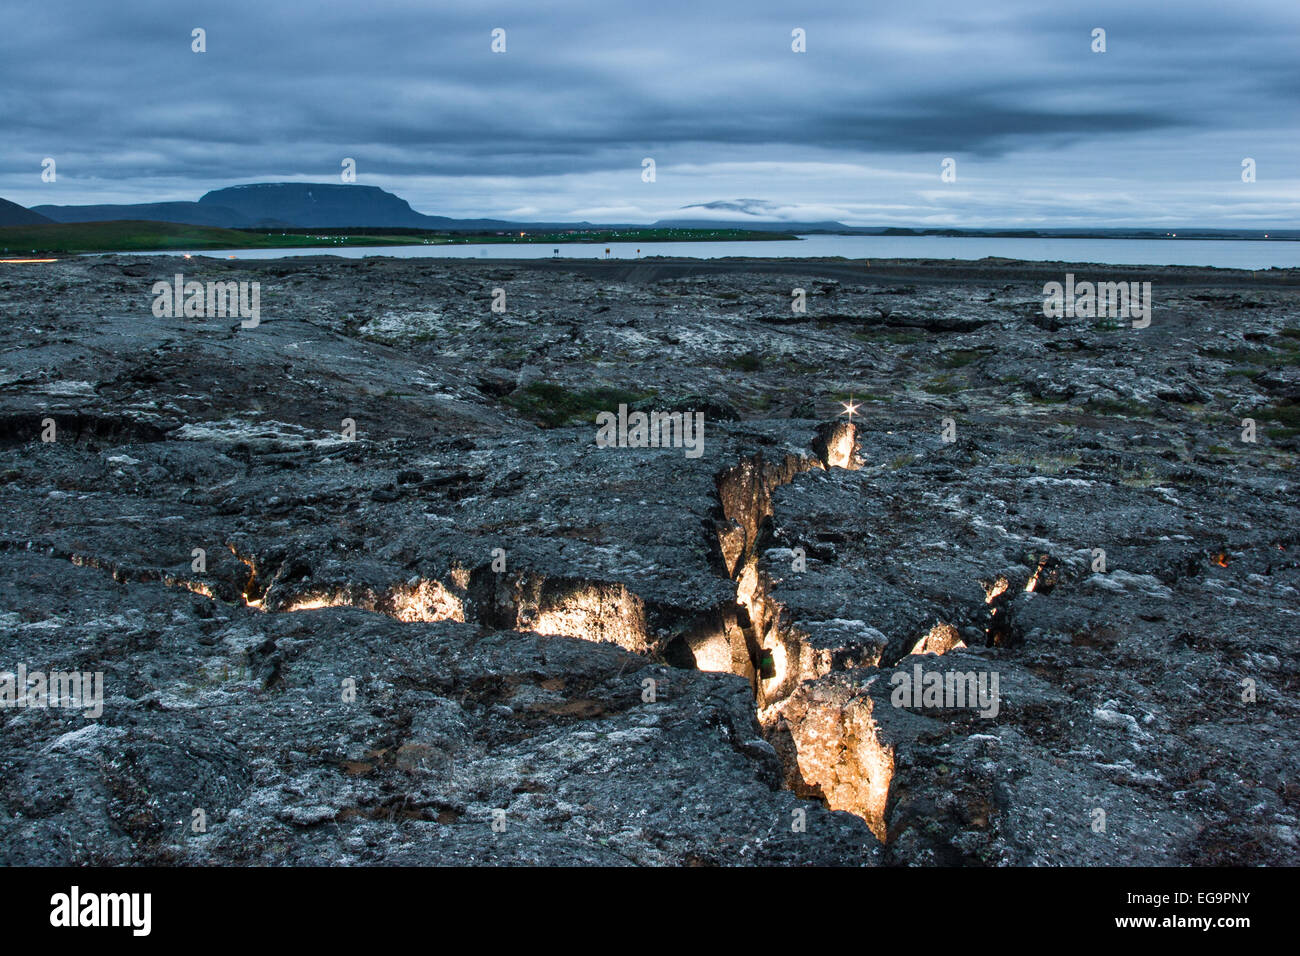 Diverging plates in a volcanic fissure zone, Myvatn, Iceland The fissures were lighted with a strobe light , Myvatn Iceland Stock Photo